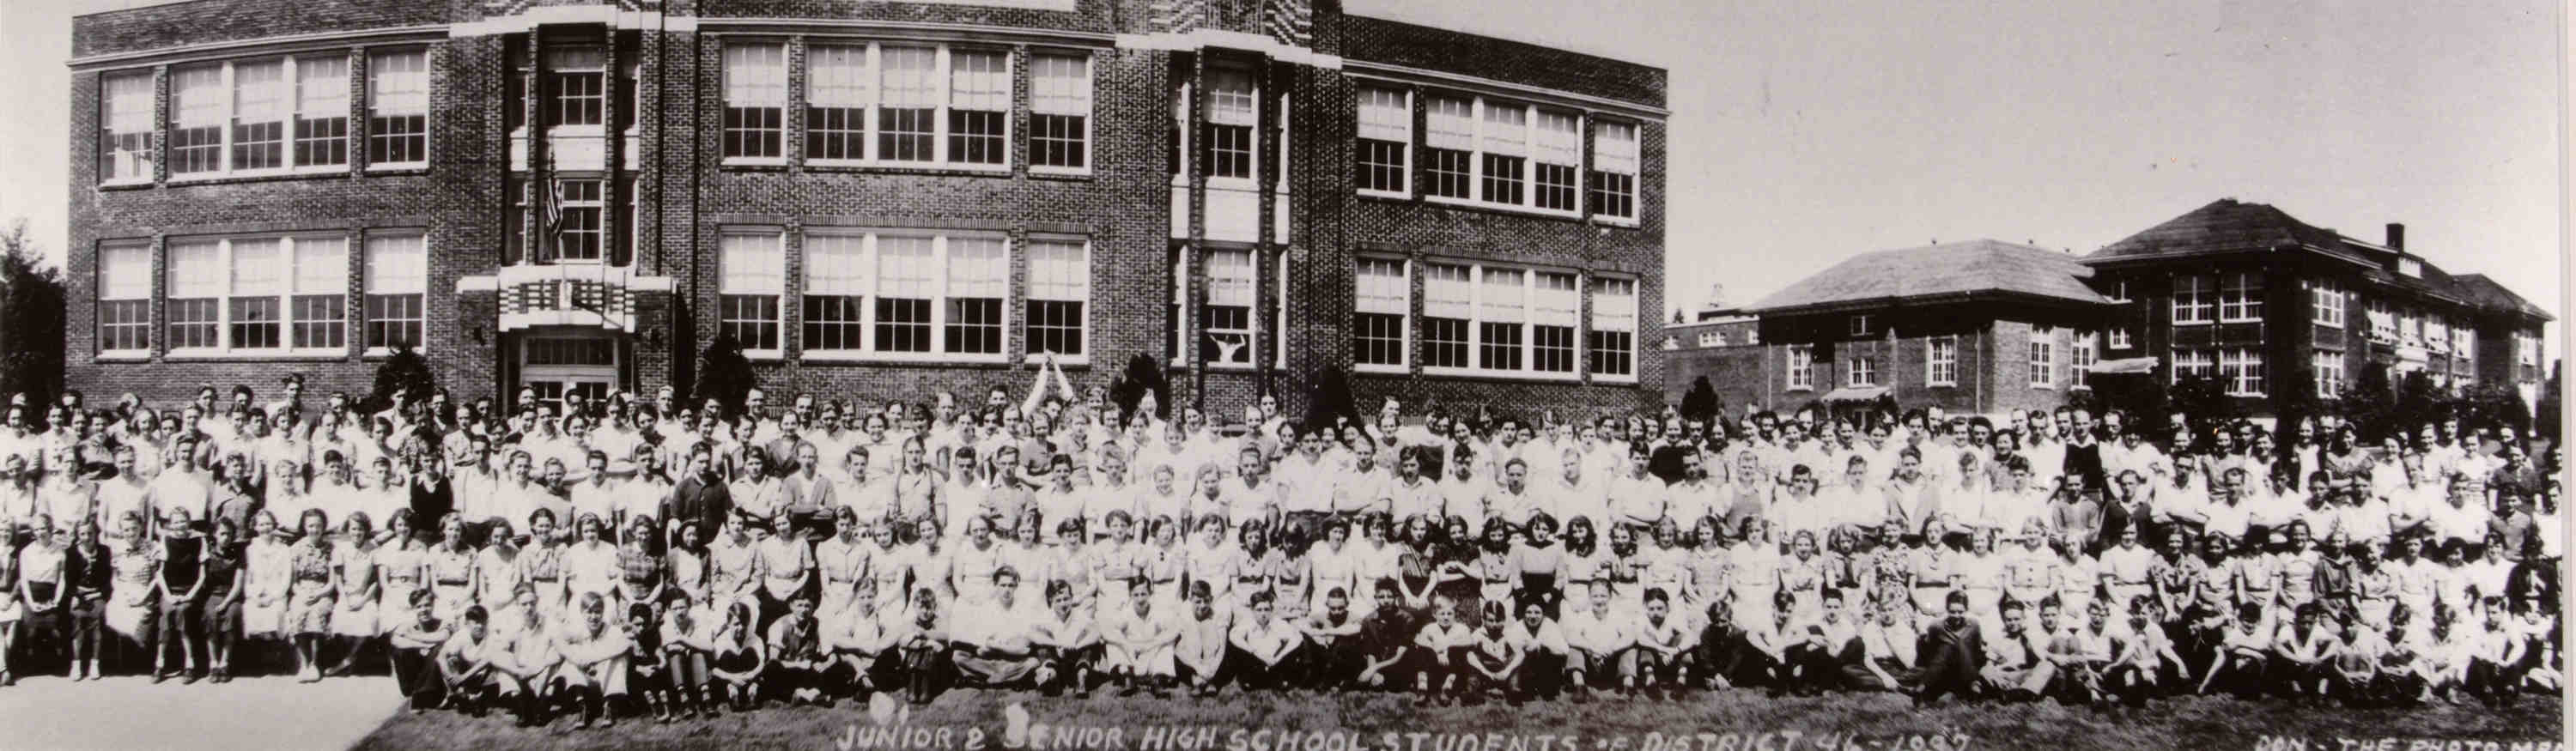 Bothell Junior High School with the High School to the right, students from both schools, 1937